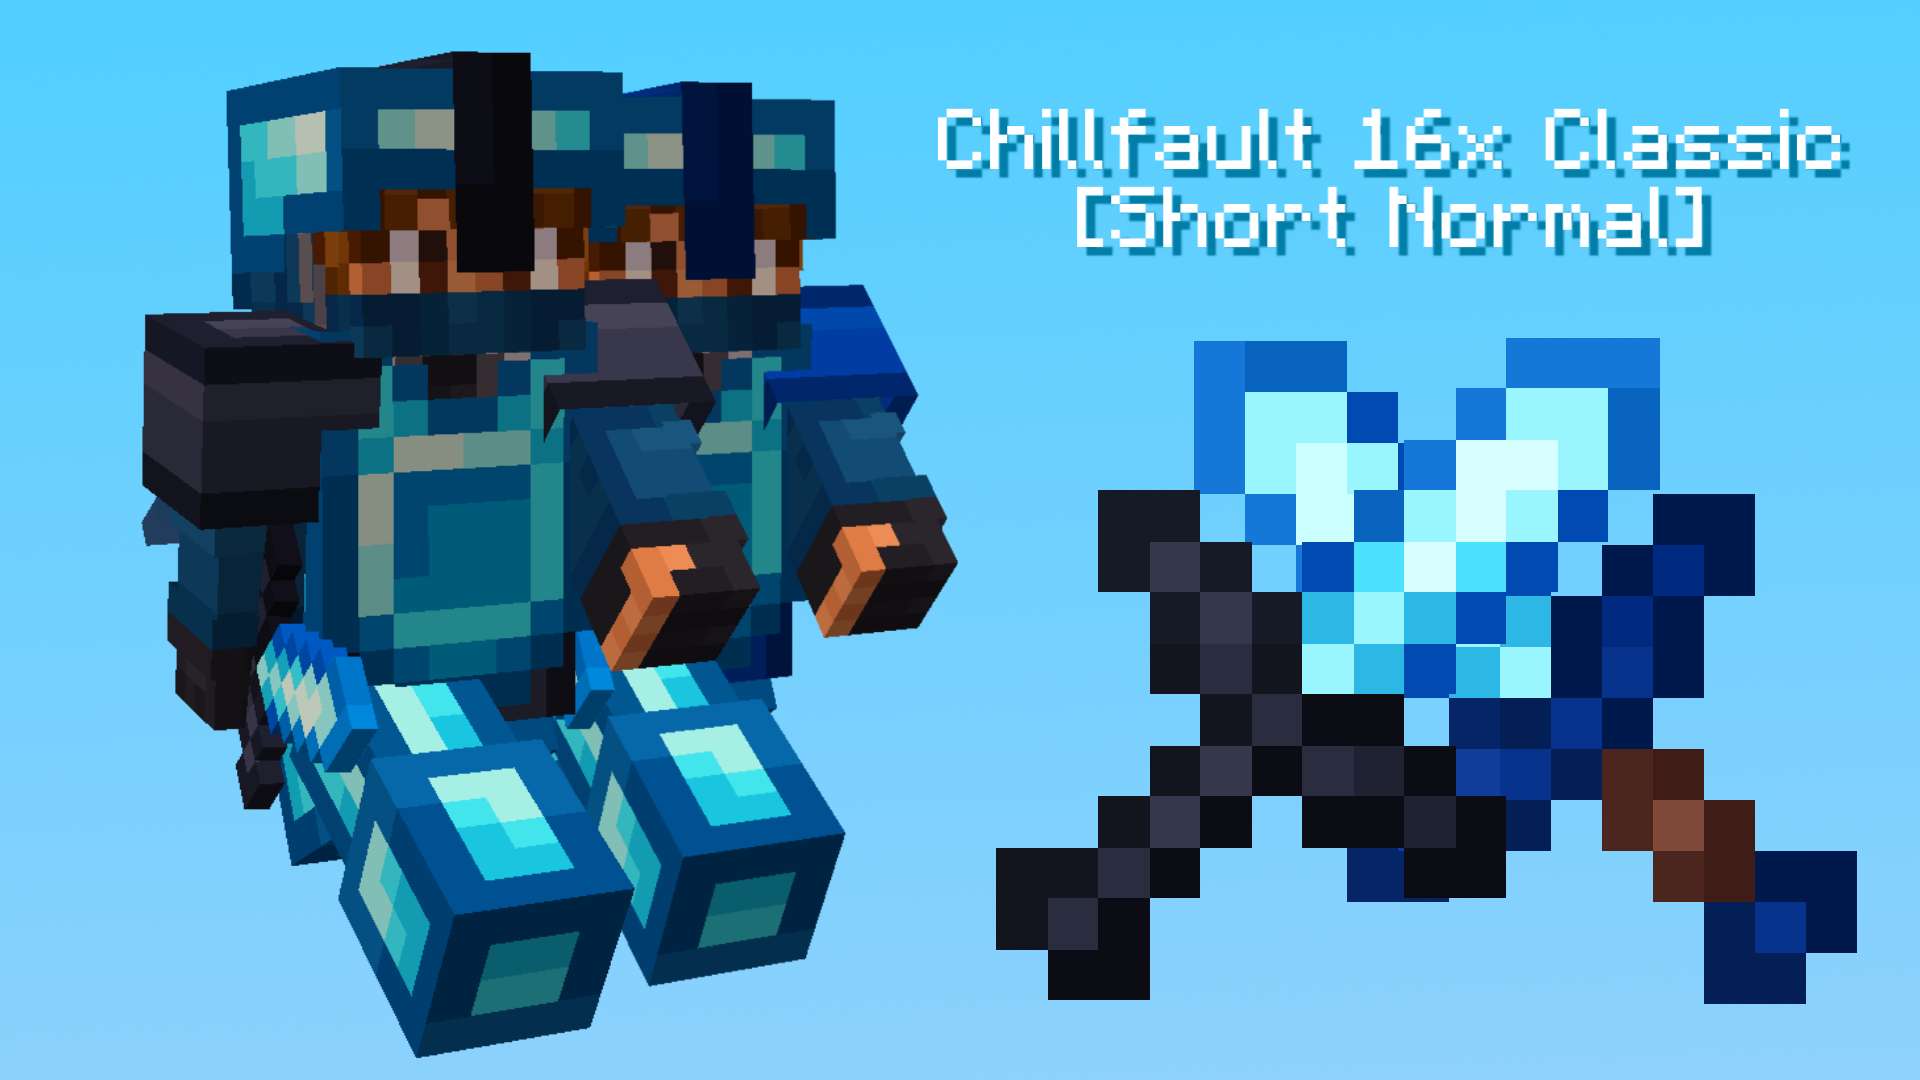 Chillfault 16x Classic [Short Normal] 16x by Jes13 on PvPRP